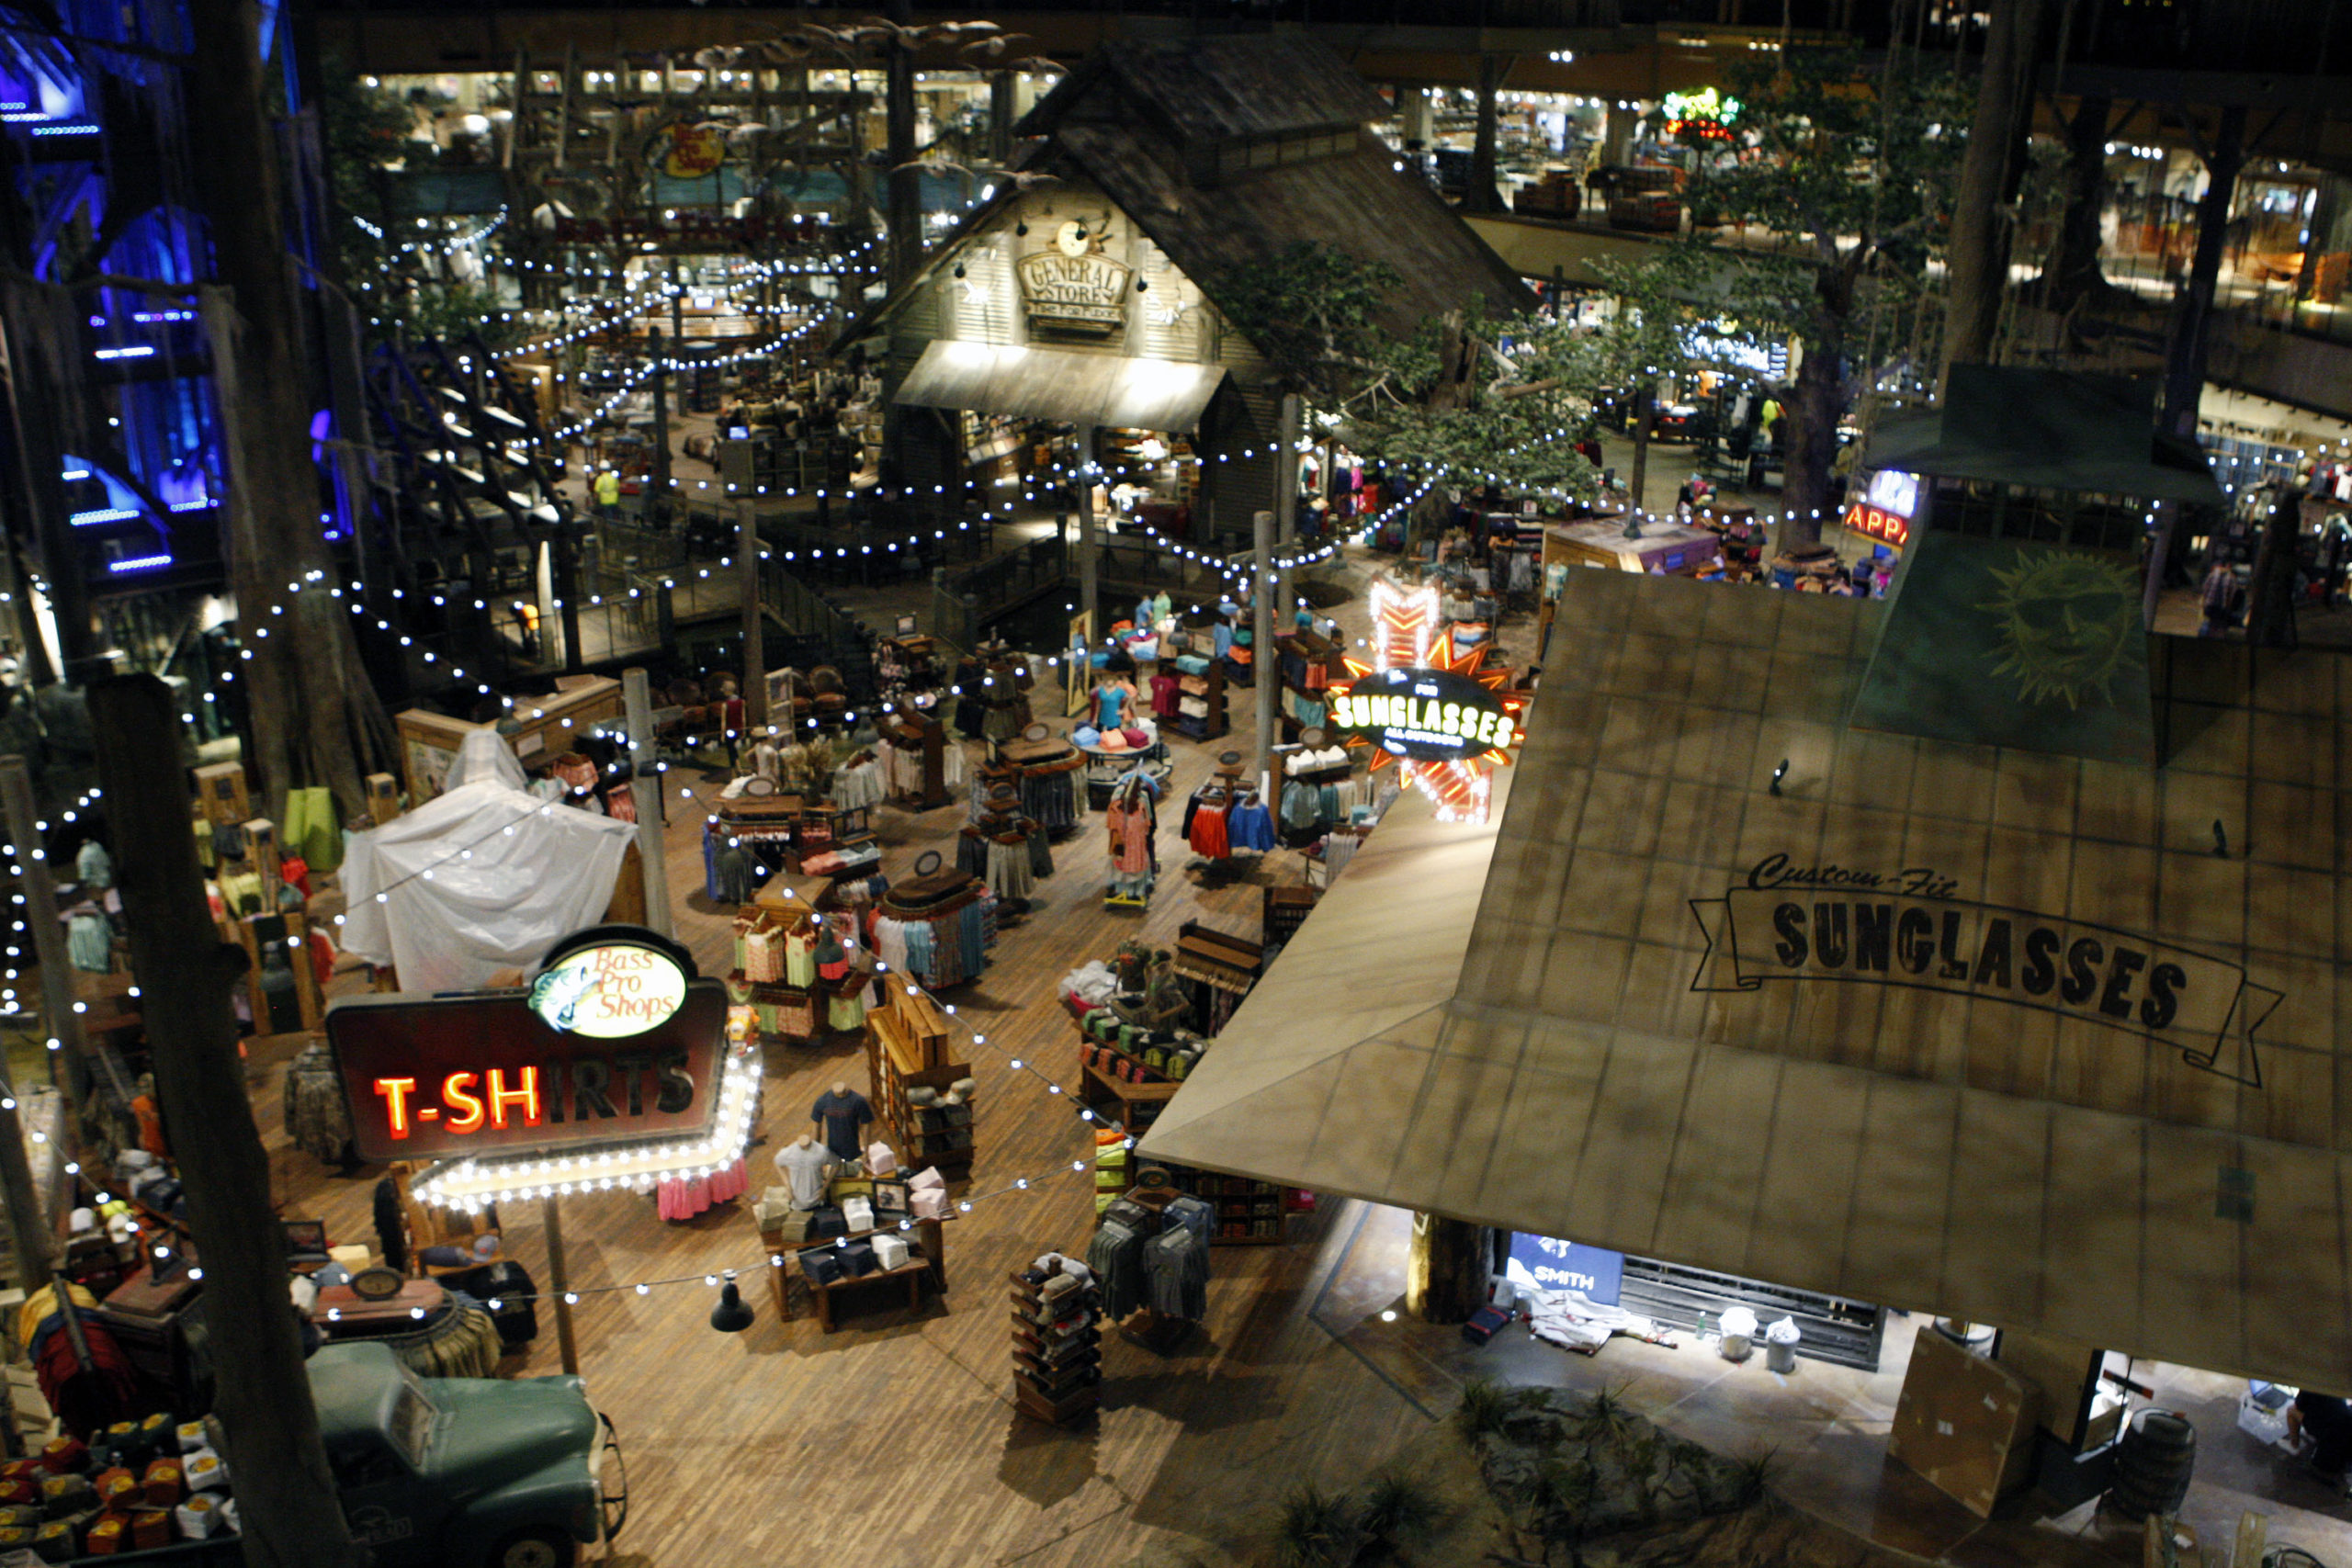 A Bass Pro Shop In A Pyramid Is Surely A Sign That The World Is Ending